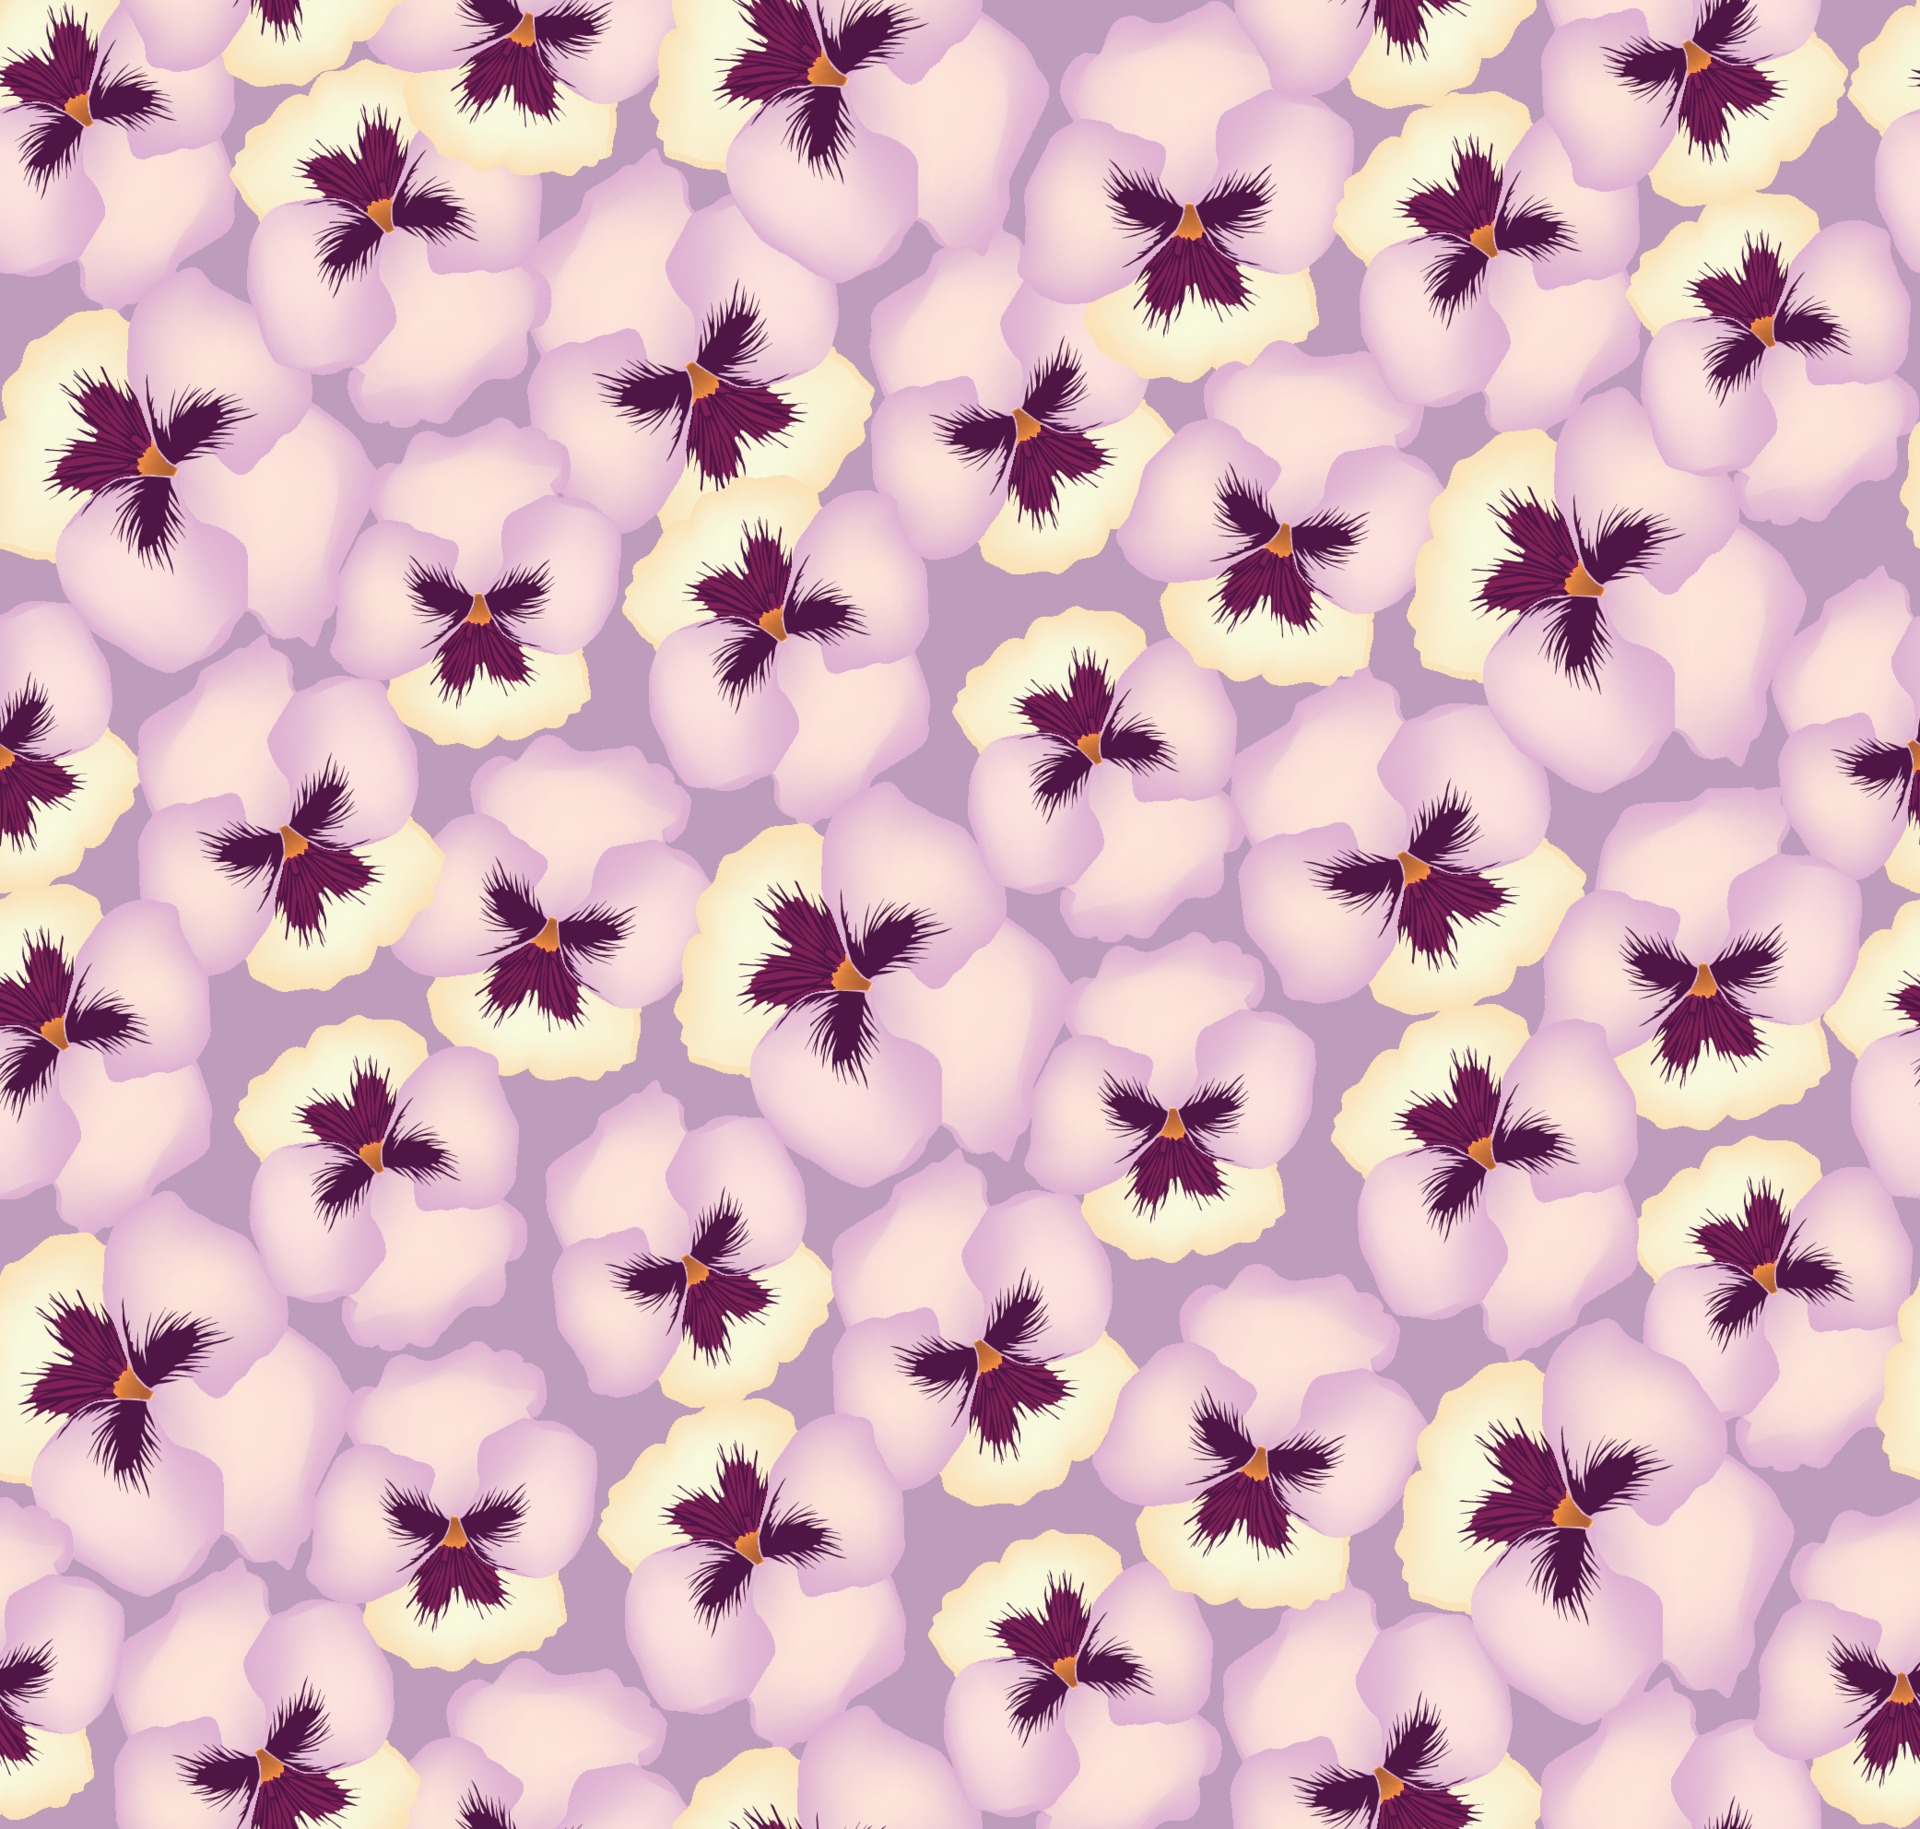 1920x1829 Floral seamless pattern. Flower pansy background. Floral seamless texture with flowers. Flourish tiled wallpaper 2276256 Vector Art